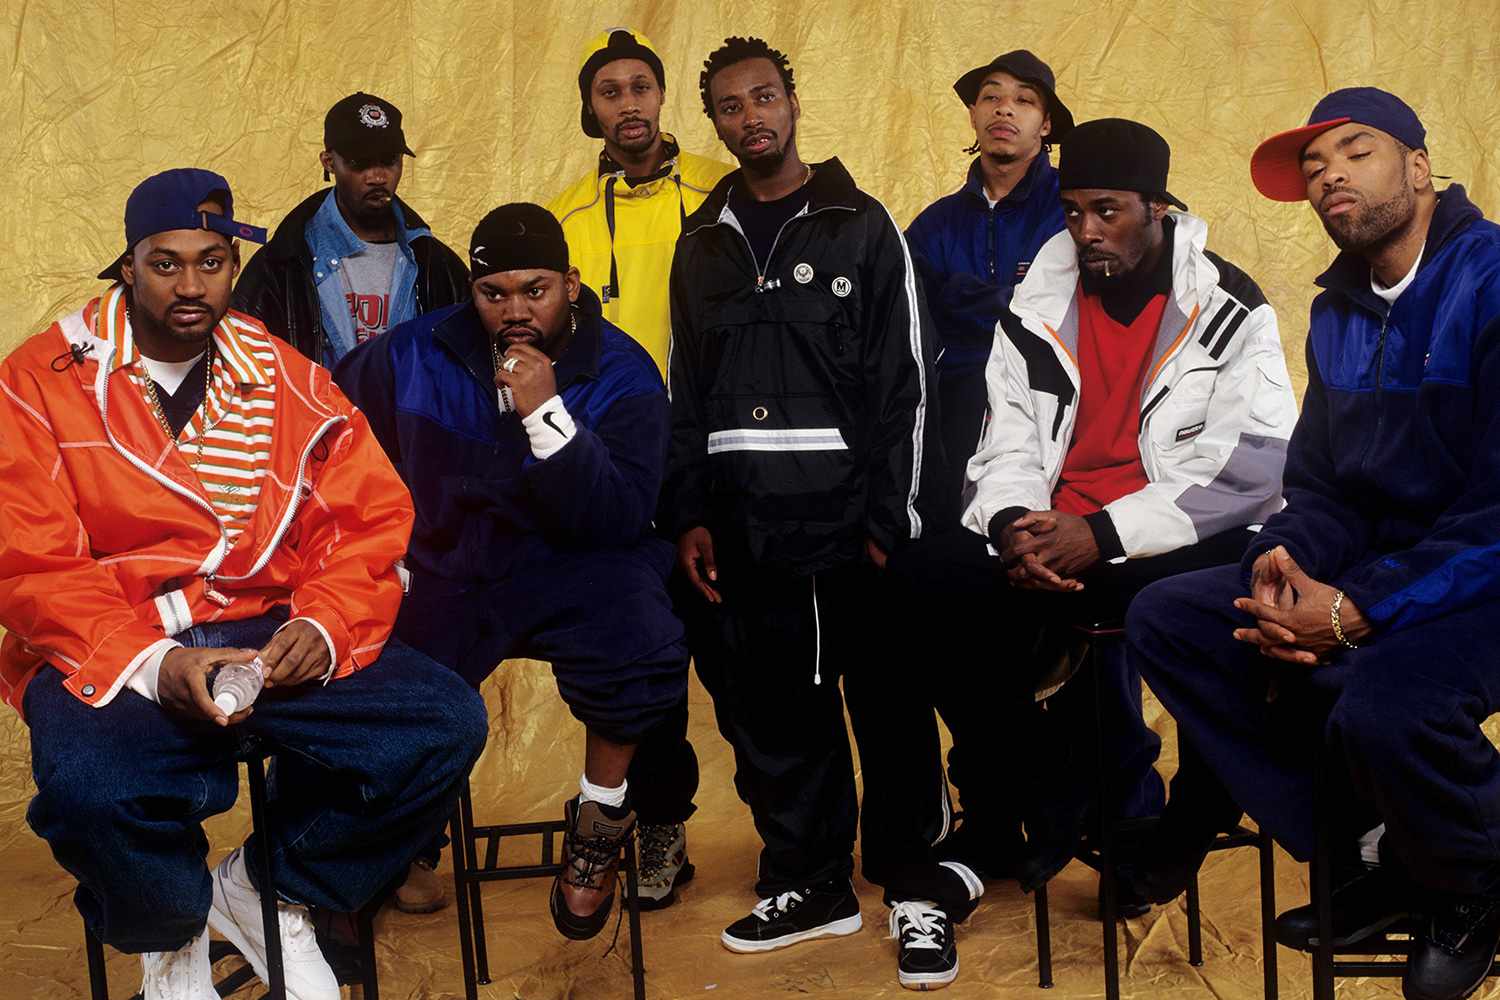 Only Copy of Ultra-Rare Wu-Tang Clan Album 'Once Upon a Time in Shaolin' to Go on Display